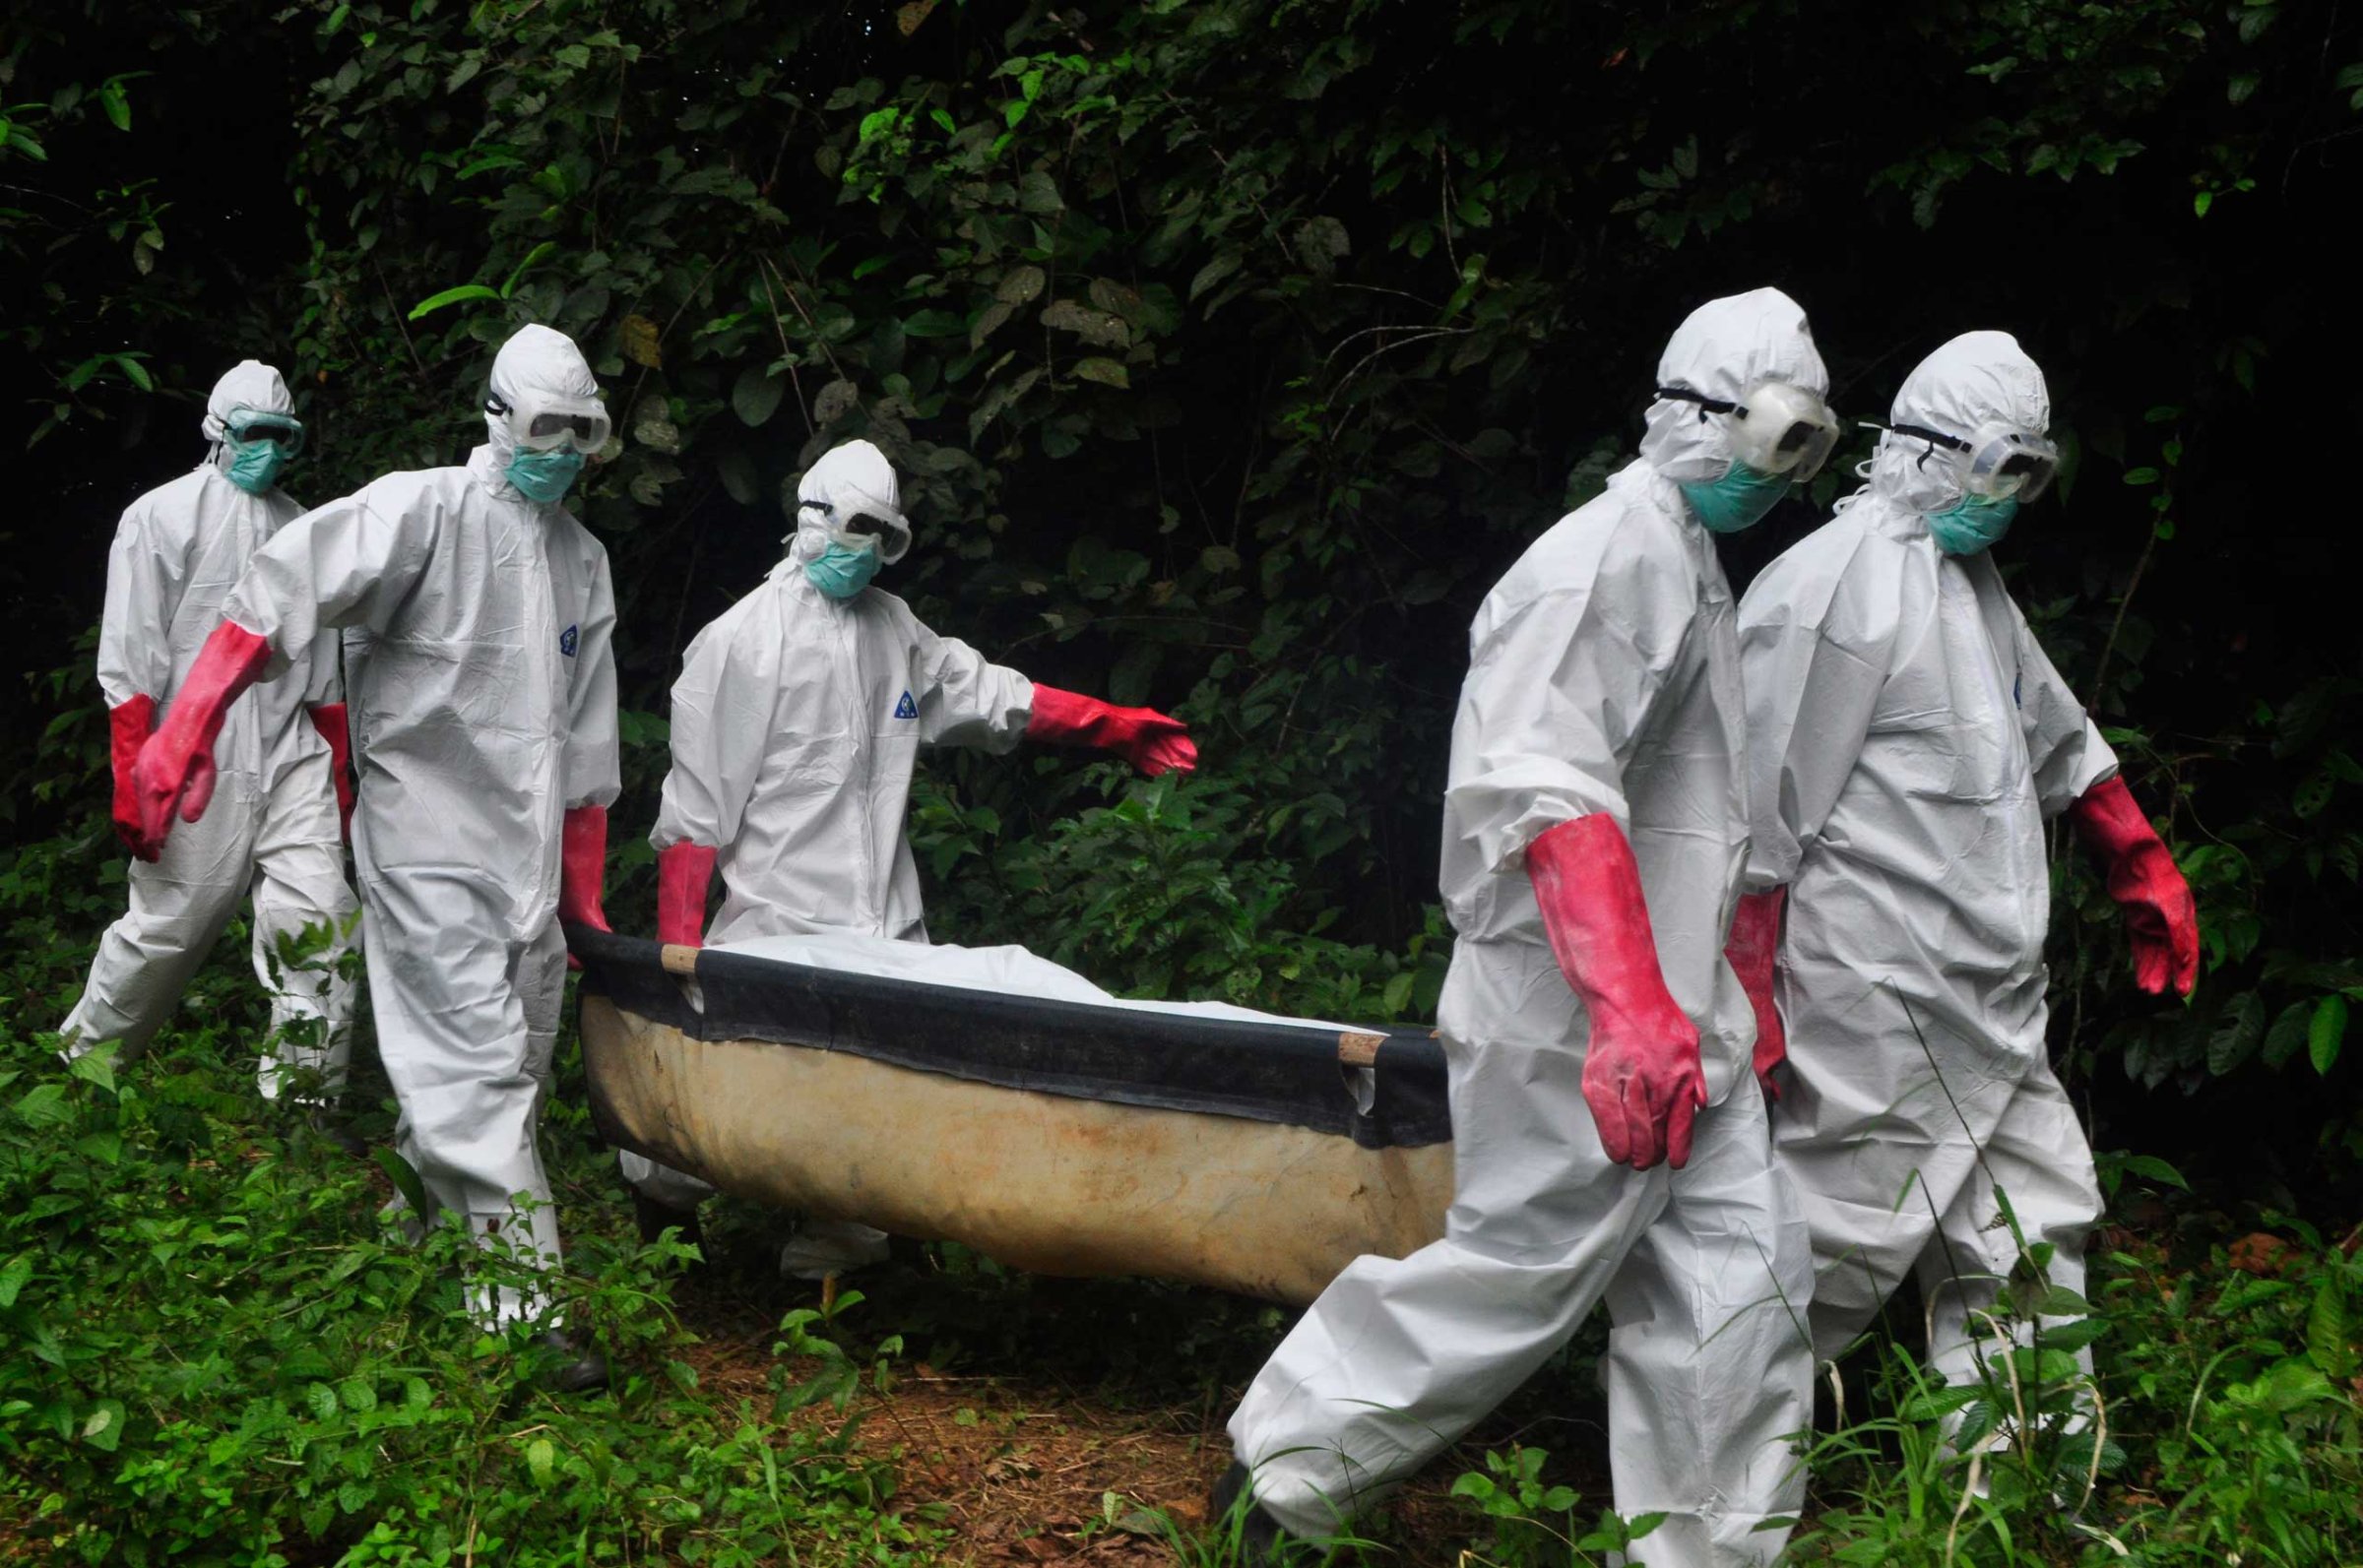 A burial team in protective gear carry the body of woman suspected to have died from the Ebola virus in Monrovia, Liberia, Oct. 18, 2014.